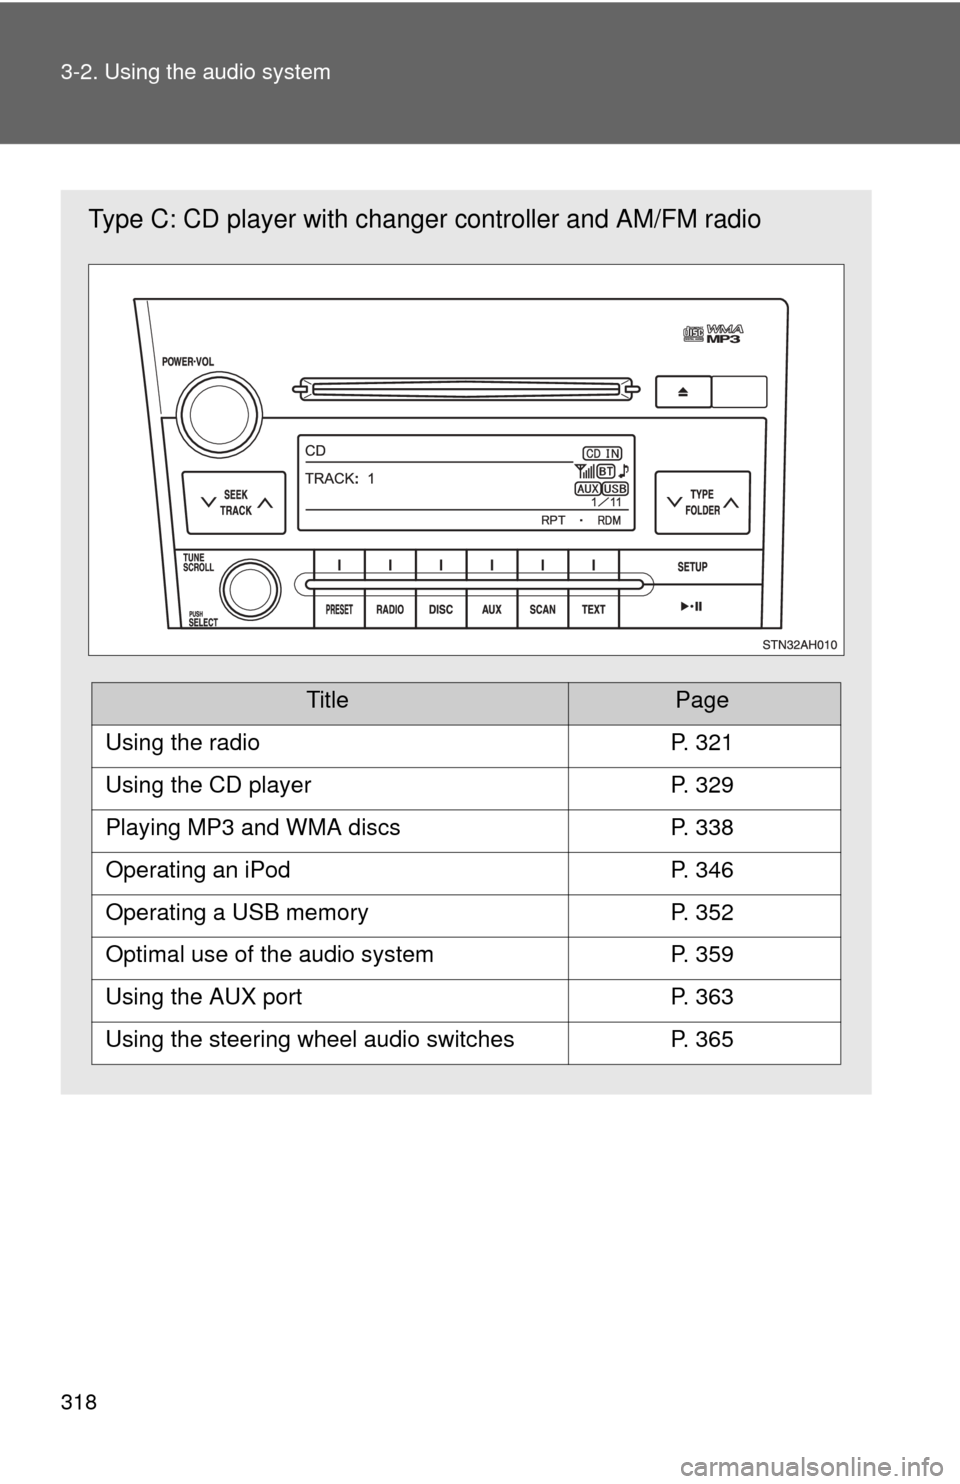 TOYOTA SEQUOIA 2012 2.G Owners Manual 318 3-2. Using the audio system
Type C: CD player with changer controller and AM/FM radio
TitlePage
Using the radioP. 321
Using the CD playerP. 329
Playing MP3 and WMA discsP. 338
Operating an iPodP. 